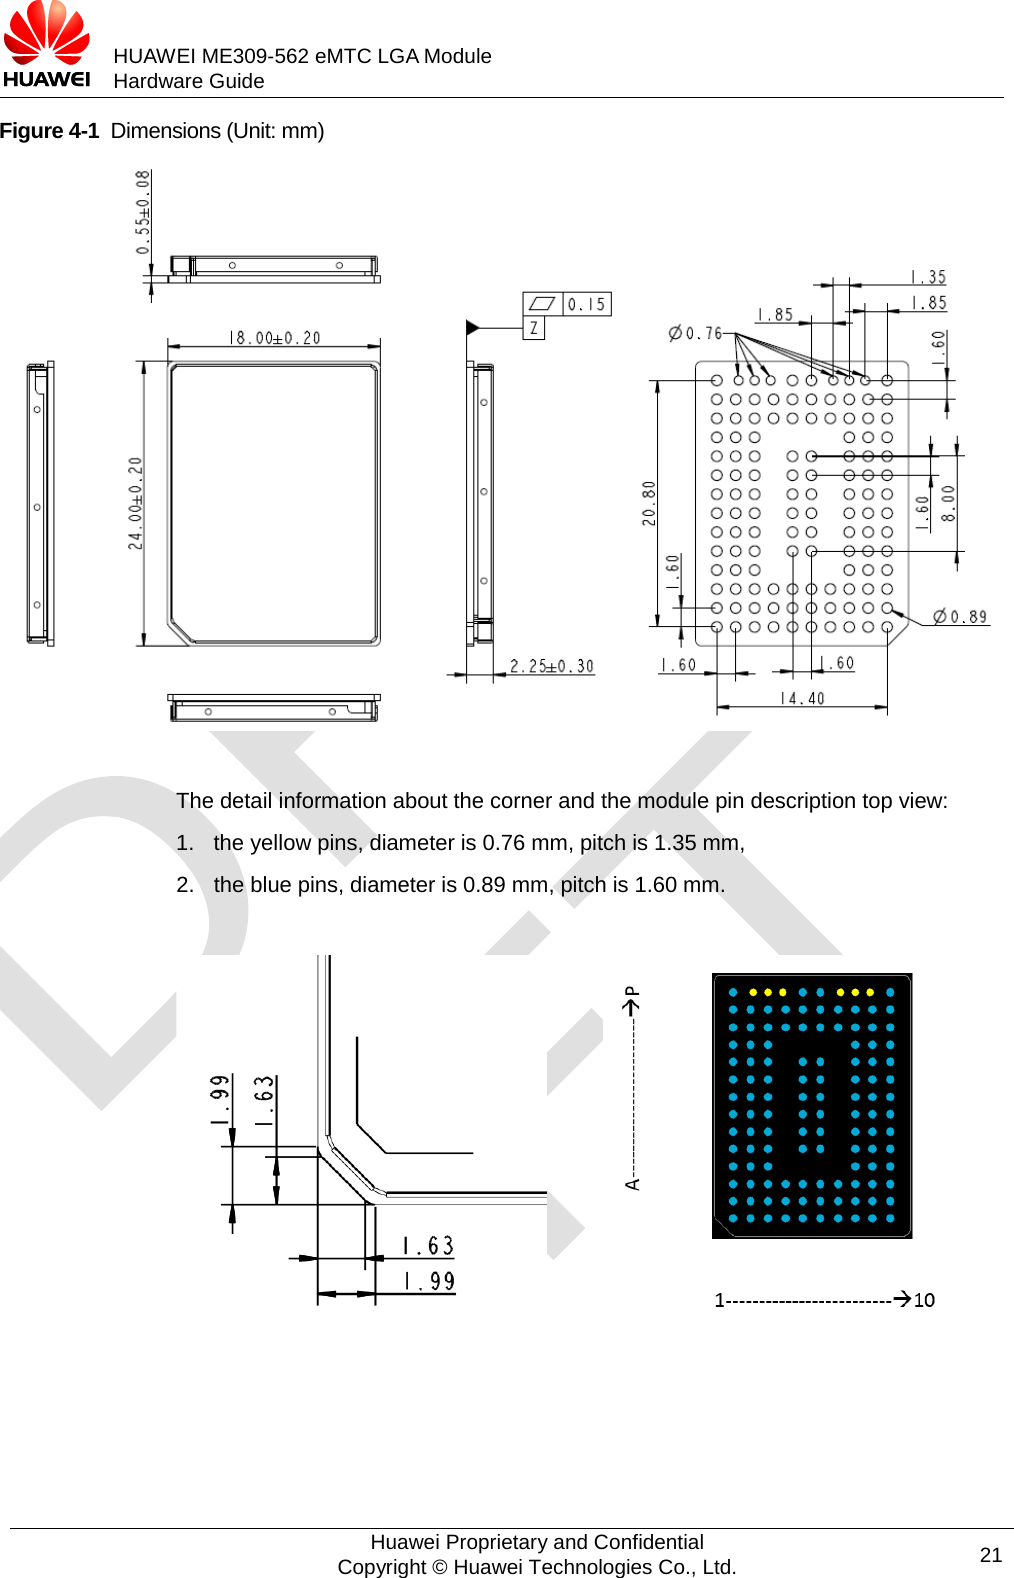           HUAWEI ME309-562 eMTC LGA Module Hardware Guide  Figure 4-1  Dimensions (Unit: mm)   The detail information about the corner and the module pin description top view: 1. the yellow pins, diameter is 0.76 mm, pitch is 1.35 mm, 2. the blue pins, diameter is 0.89 mm, pitch is 1.60 mm.            Huawei Proprietary and Confidential Copyright © Huawei Technologies Co., Ltd. 21  